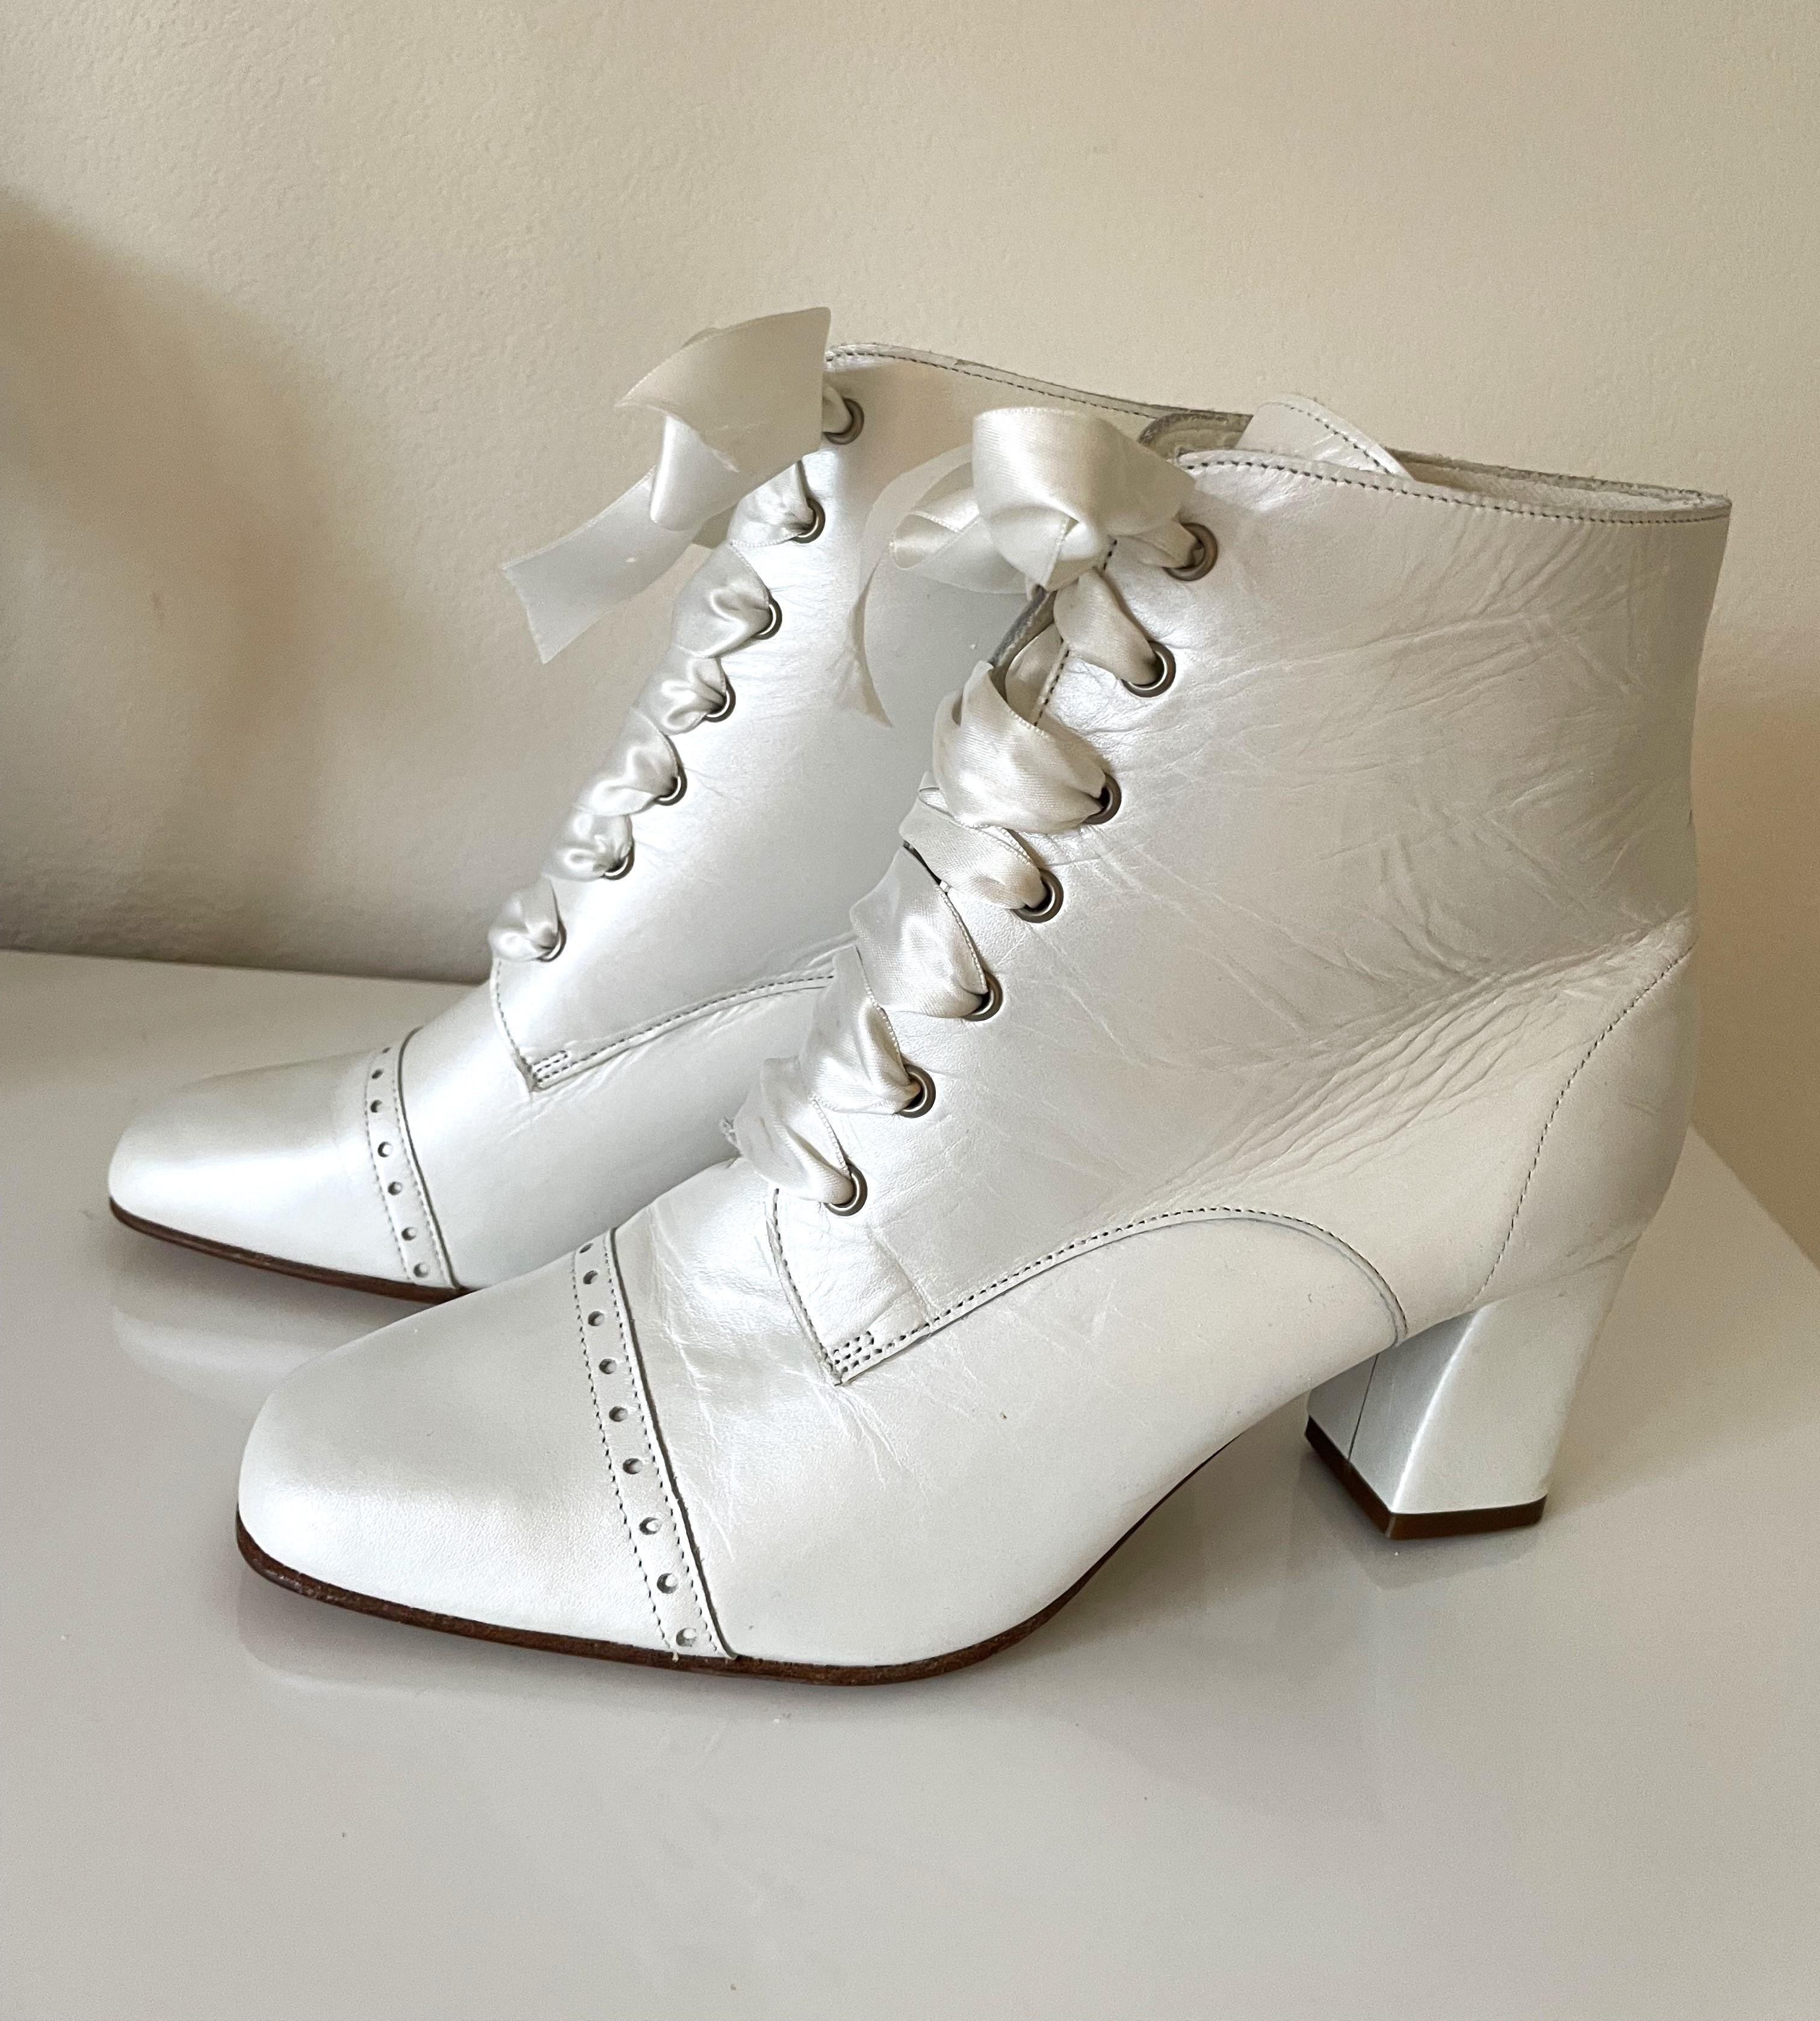 Very rare vintage bridal boots shoes from Courman a renowned bridal boutique in Paris from the 1980s at that time situated at Palais des Congres. If you love them, you love them! 
